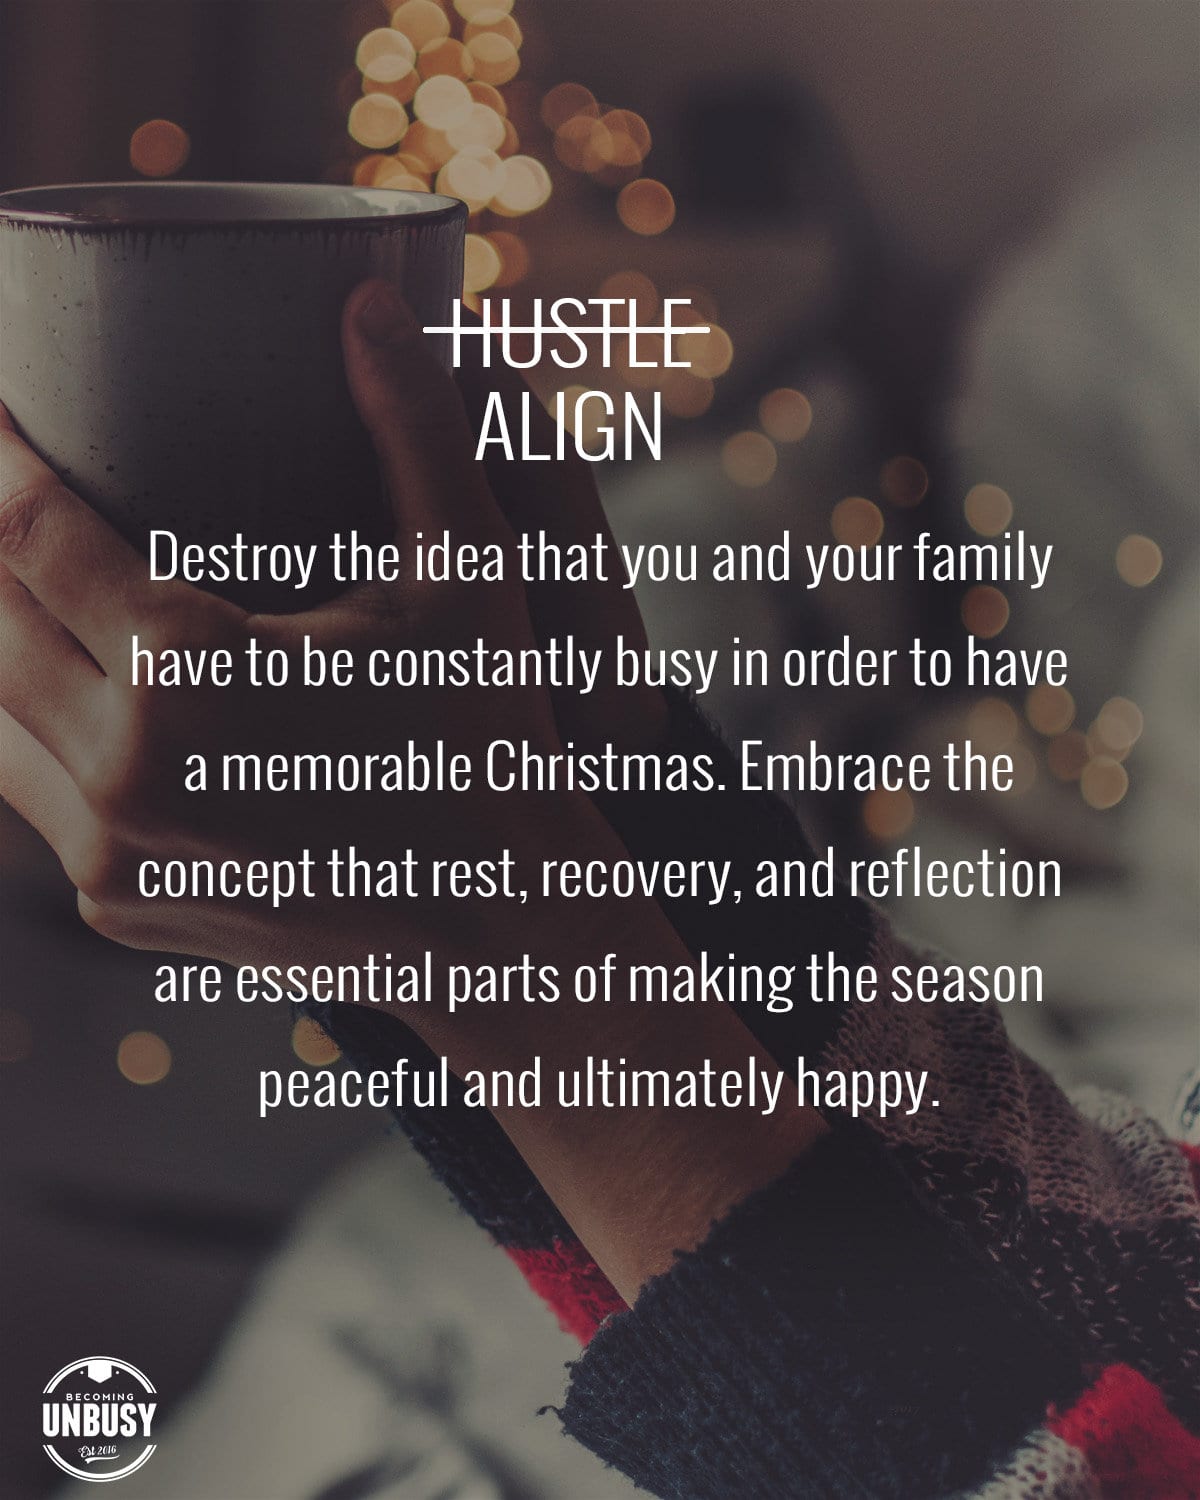 A woman holding a coffee mug with holiday lights in the background with the following quote over top, "Destroy the idea that you and your family have to be constantly busy in order to have a memorable Christmas. Embrace the concept that rest, recovery, and reflection are essential parts of making the season peaceful and ultimately happy."